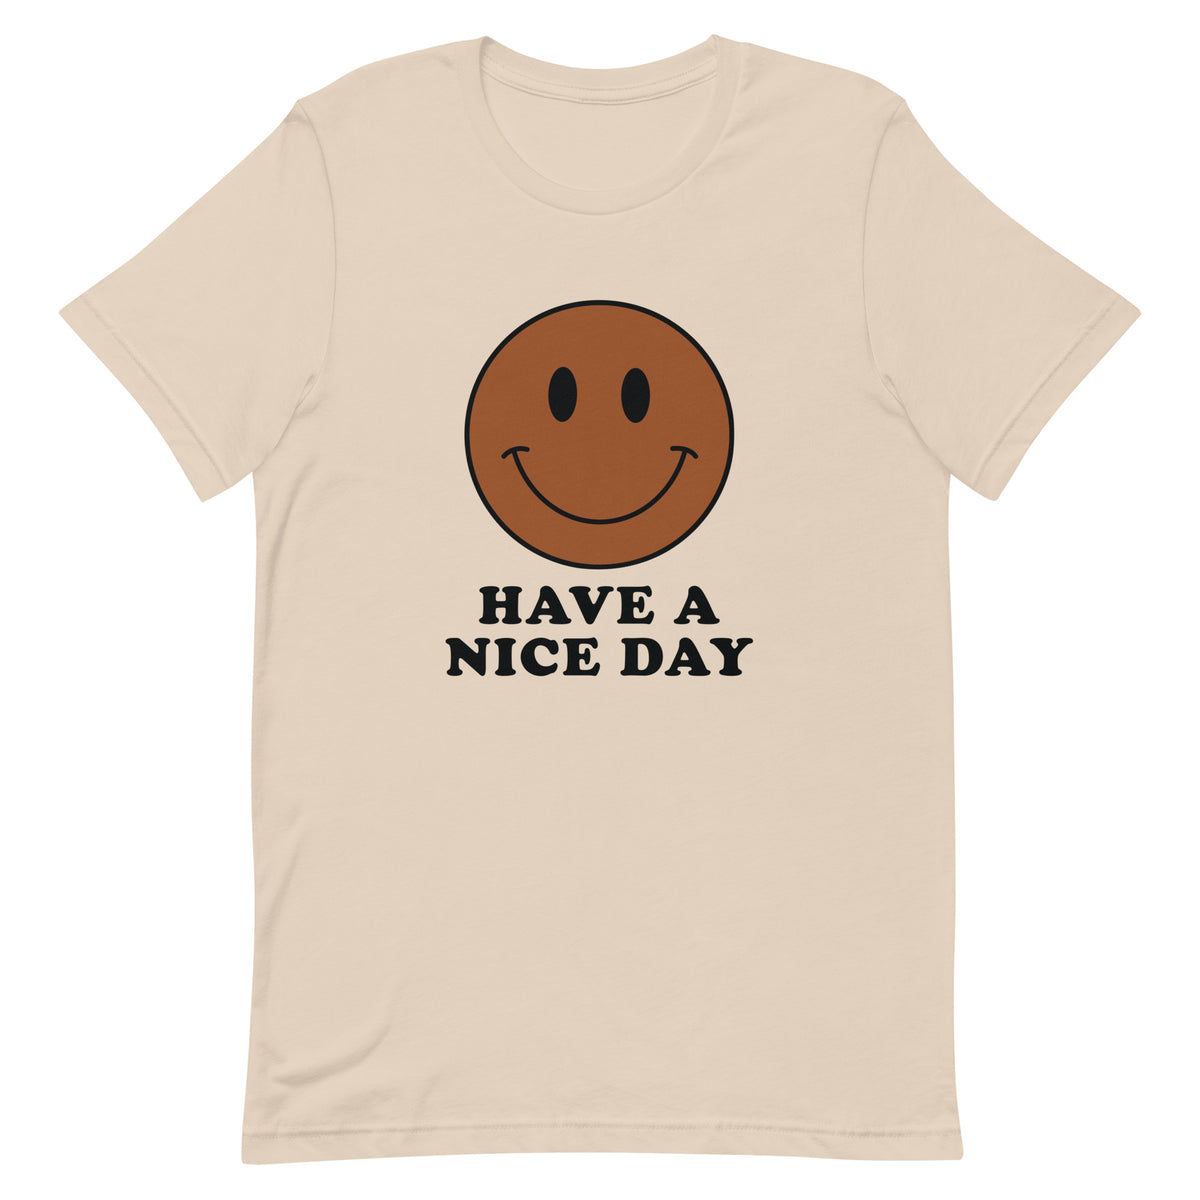 Have A Nice Day T-Shirt - Brown & Black